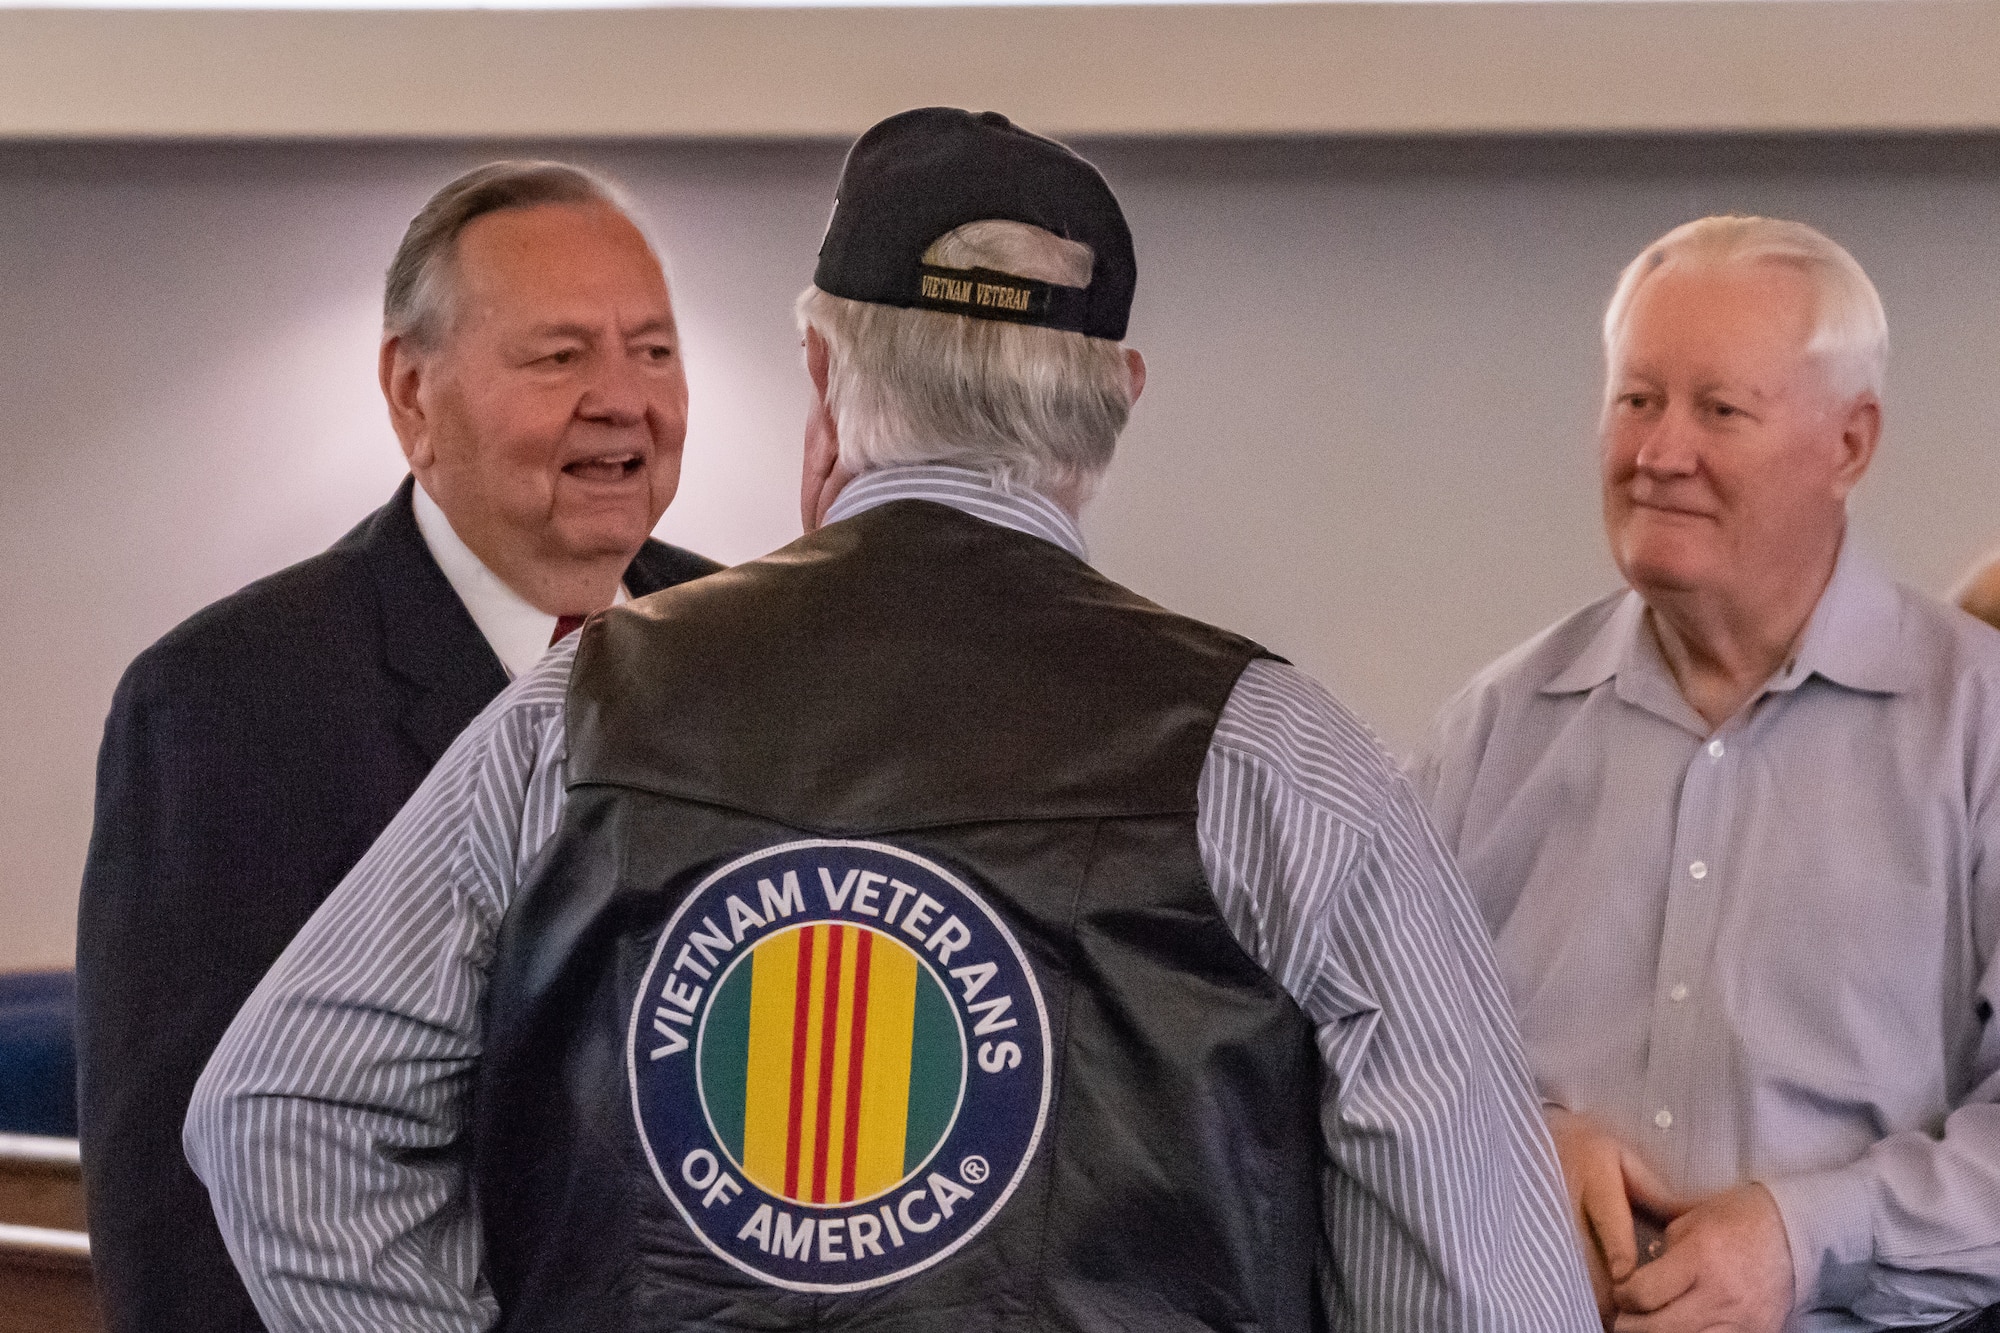 David Miller talks with friends at a ceremony where he was presented the Distinguished Flying Cross Award at Nacogdoches, Texas, Oct. 13, 2018. Miller earned the award for his actions during a tour in the Vietnam War. (U.S. Air Force photo by Tech. Sgt. Cody Burt/Released)